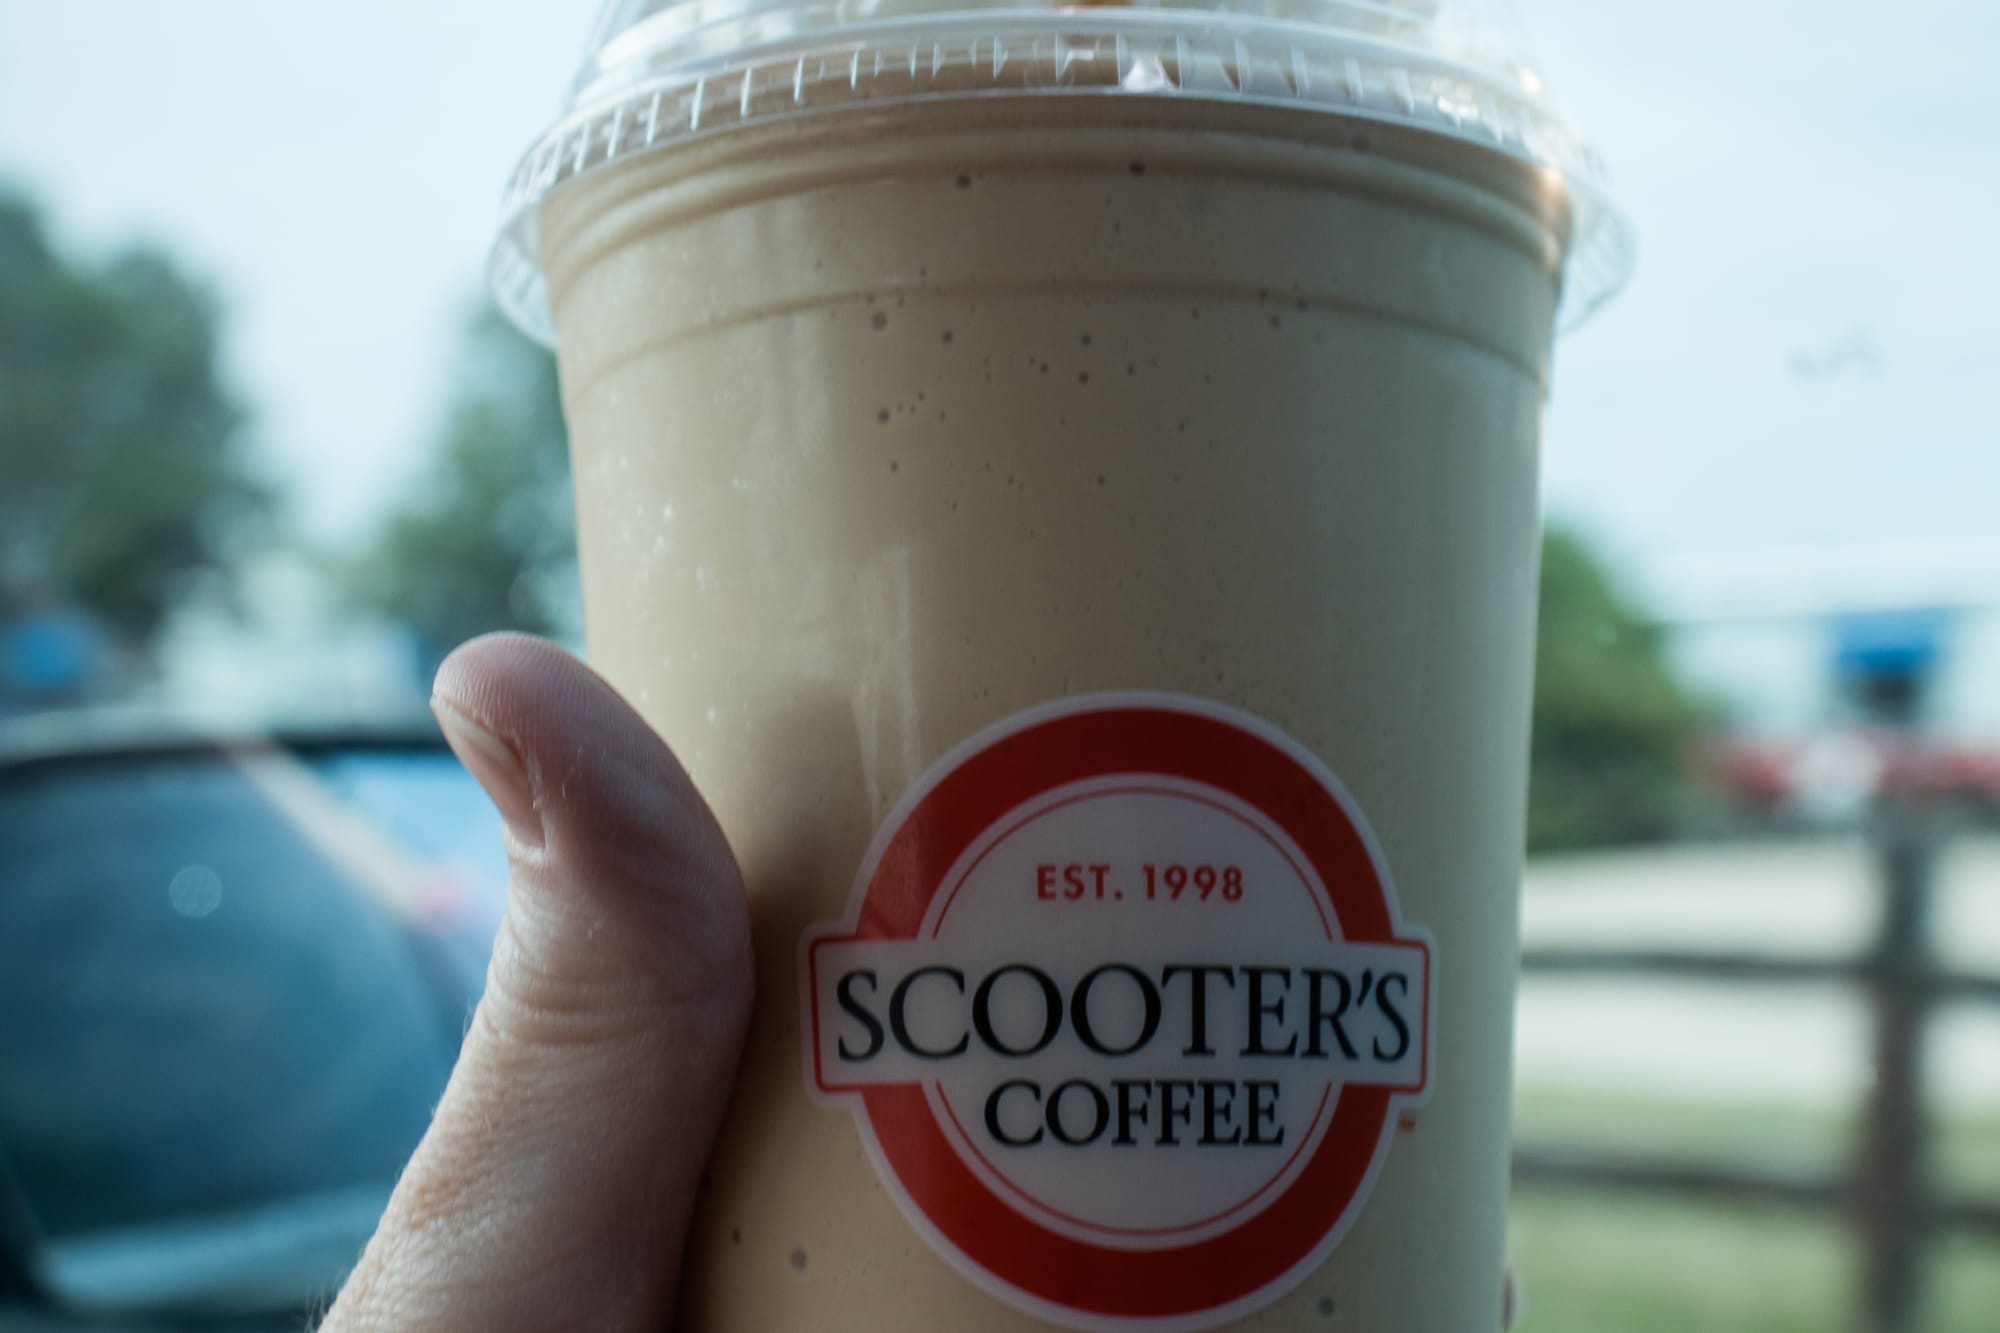 scooters coffee